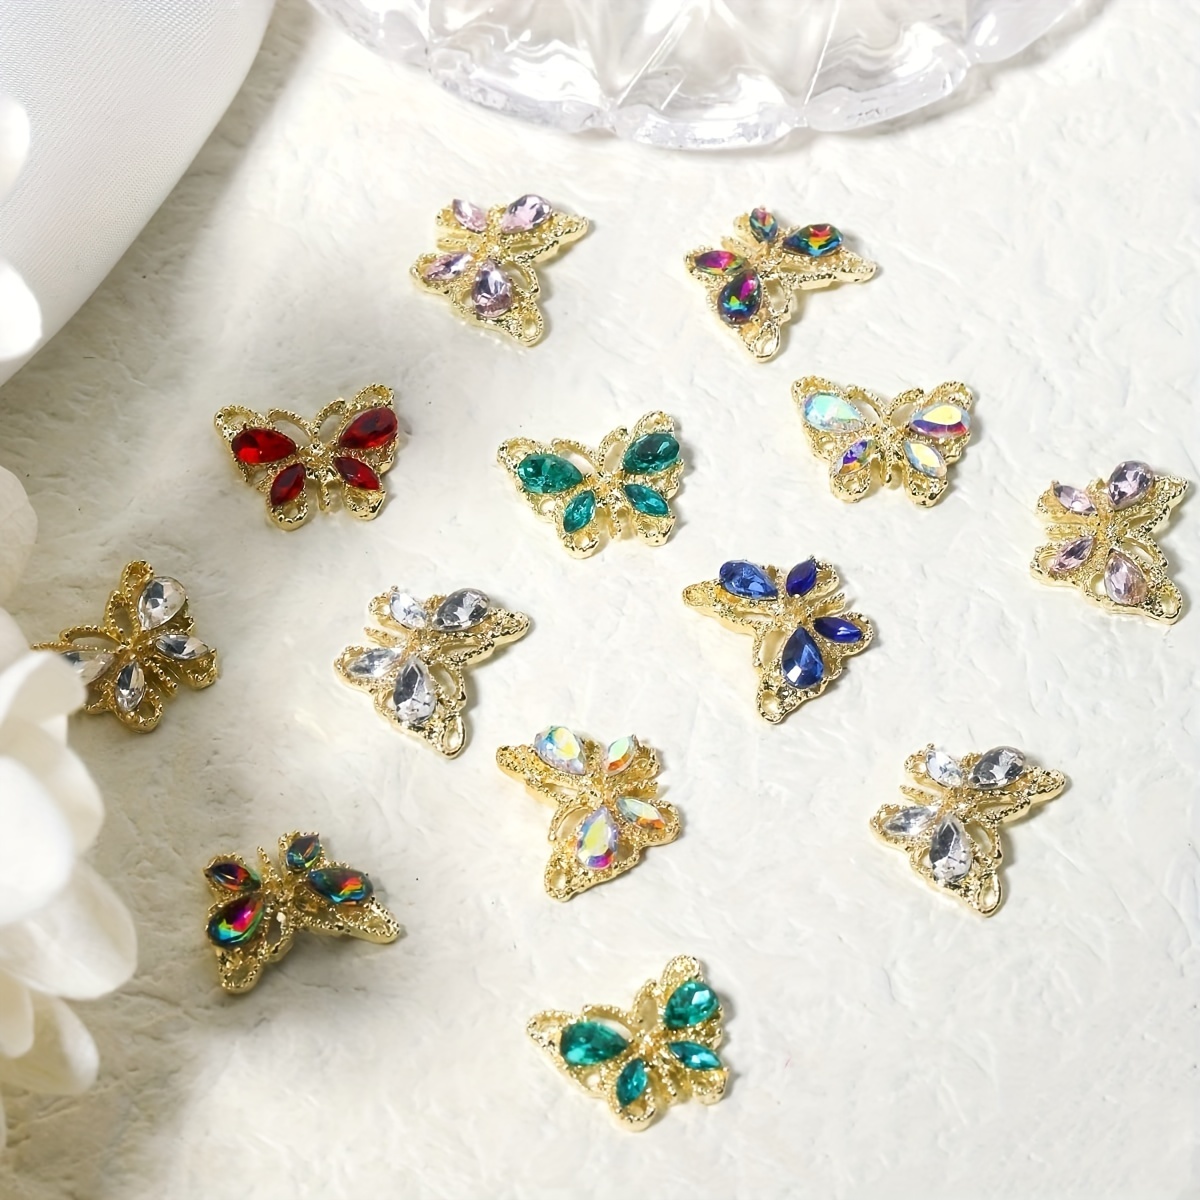 3d Butterfly Nail Charms Nails Butterflies Rhinestones Big Nail Gems 6  Color Cute Crystal Alloy Nail Art Supplies Decor For Acrylic Nails Face  Makeup Crafts Jewelry Diy Nail Art Decoration Accessories 